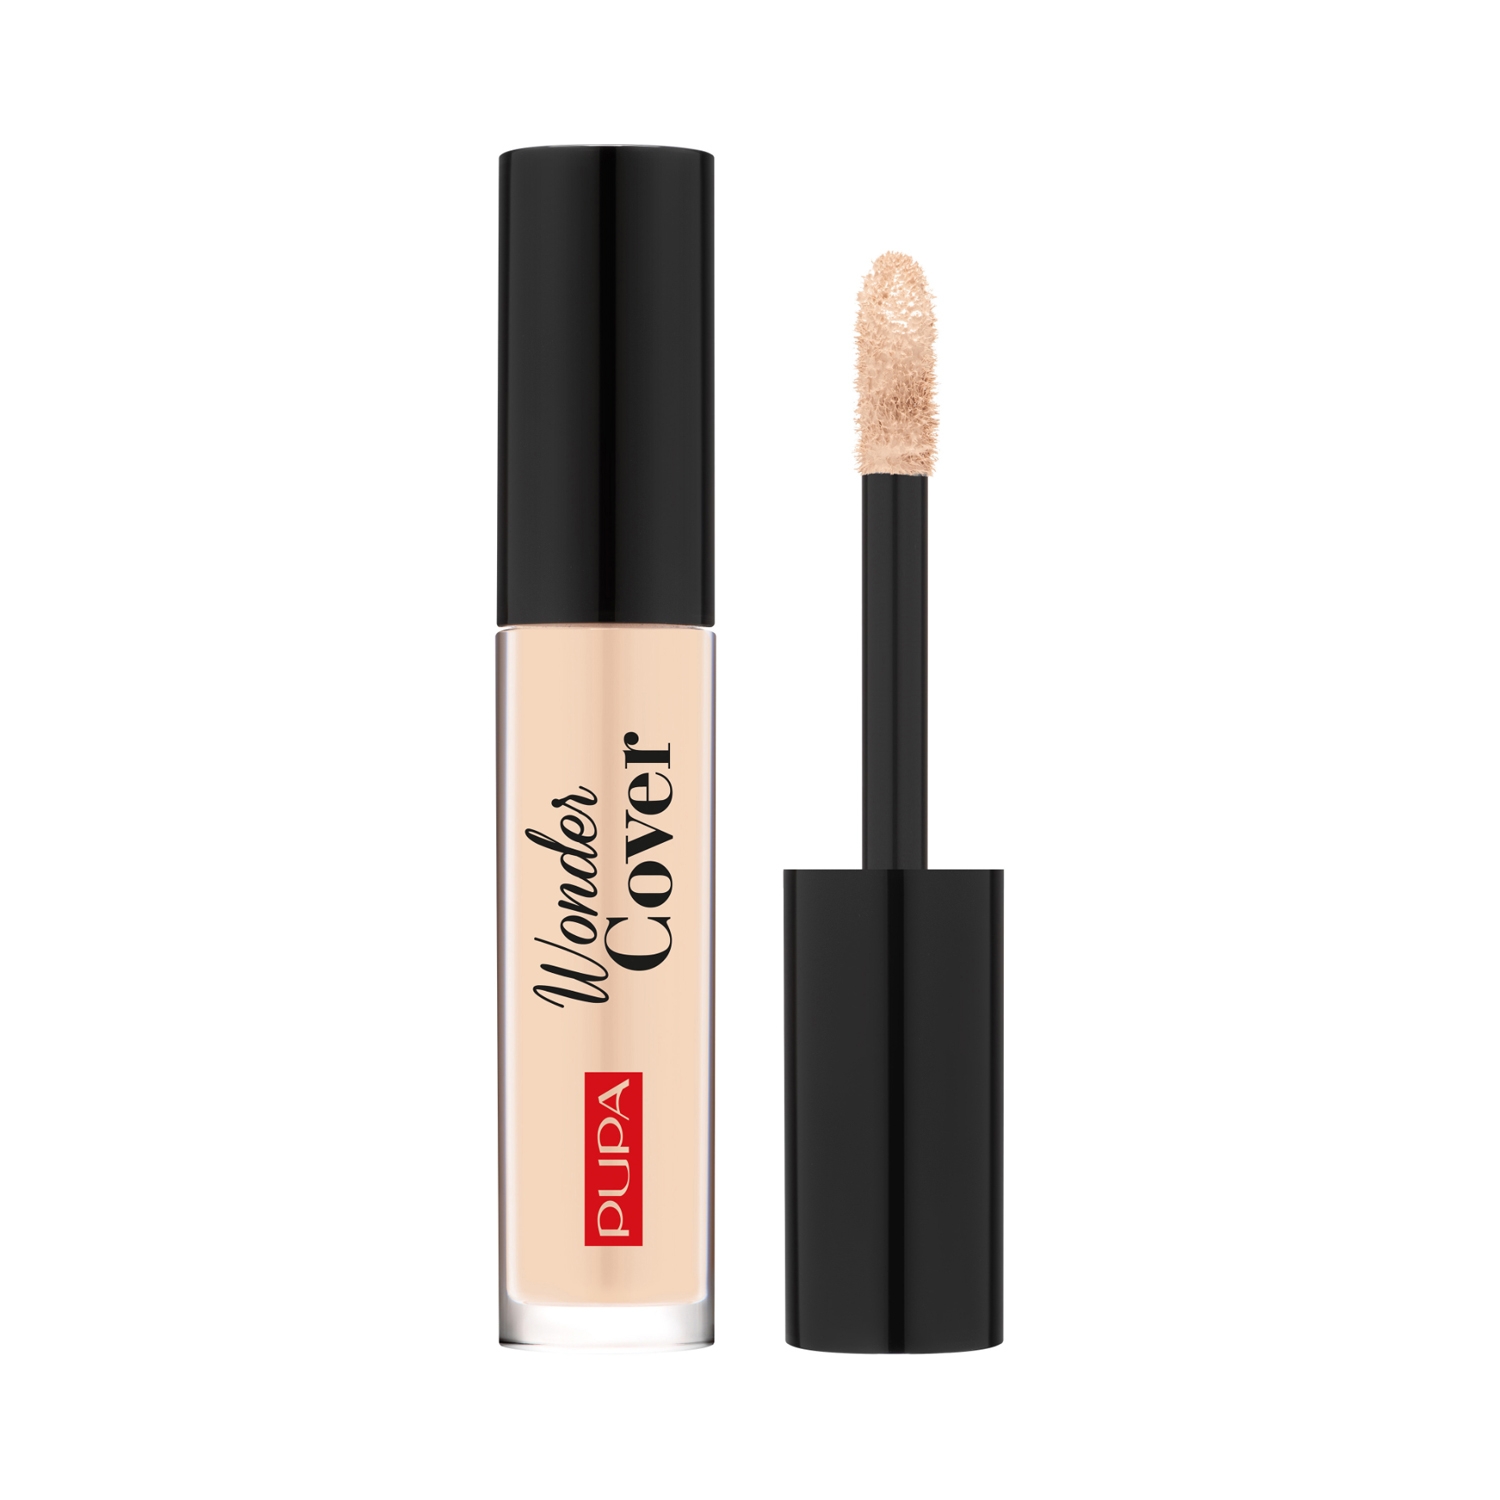 Pupa Milano | Pupa Milano Wonder Cover Full Coverage Concealer Perfecting Effect - 002 Light Beige (4.2ml)